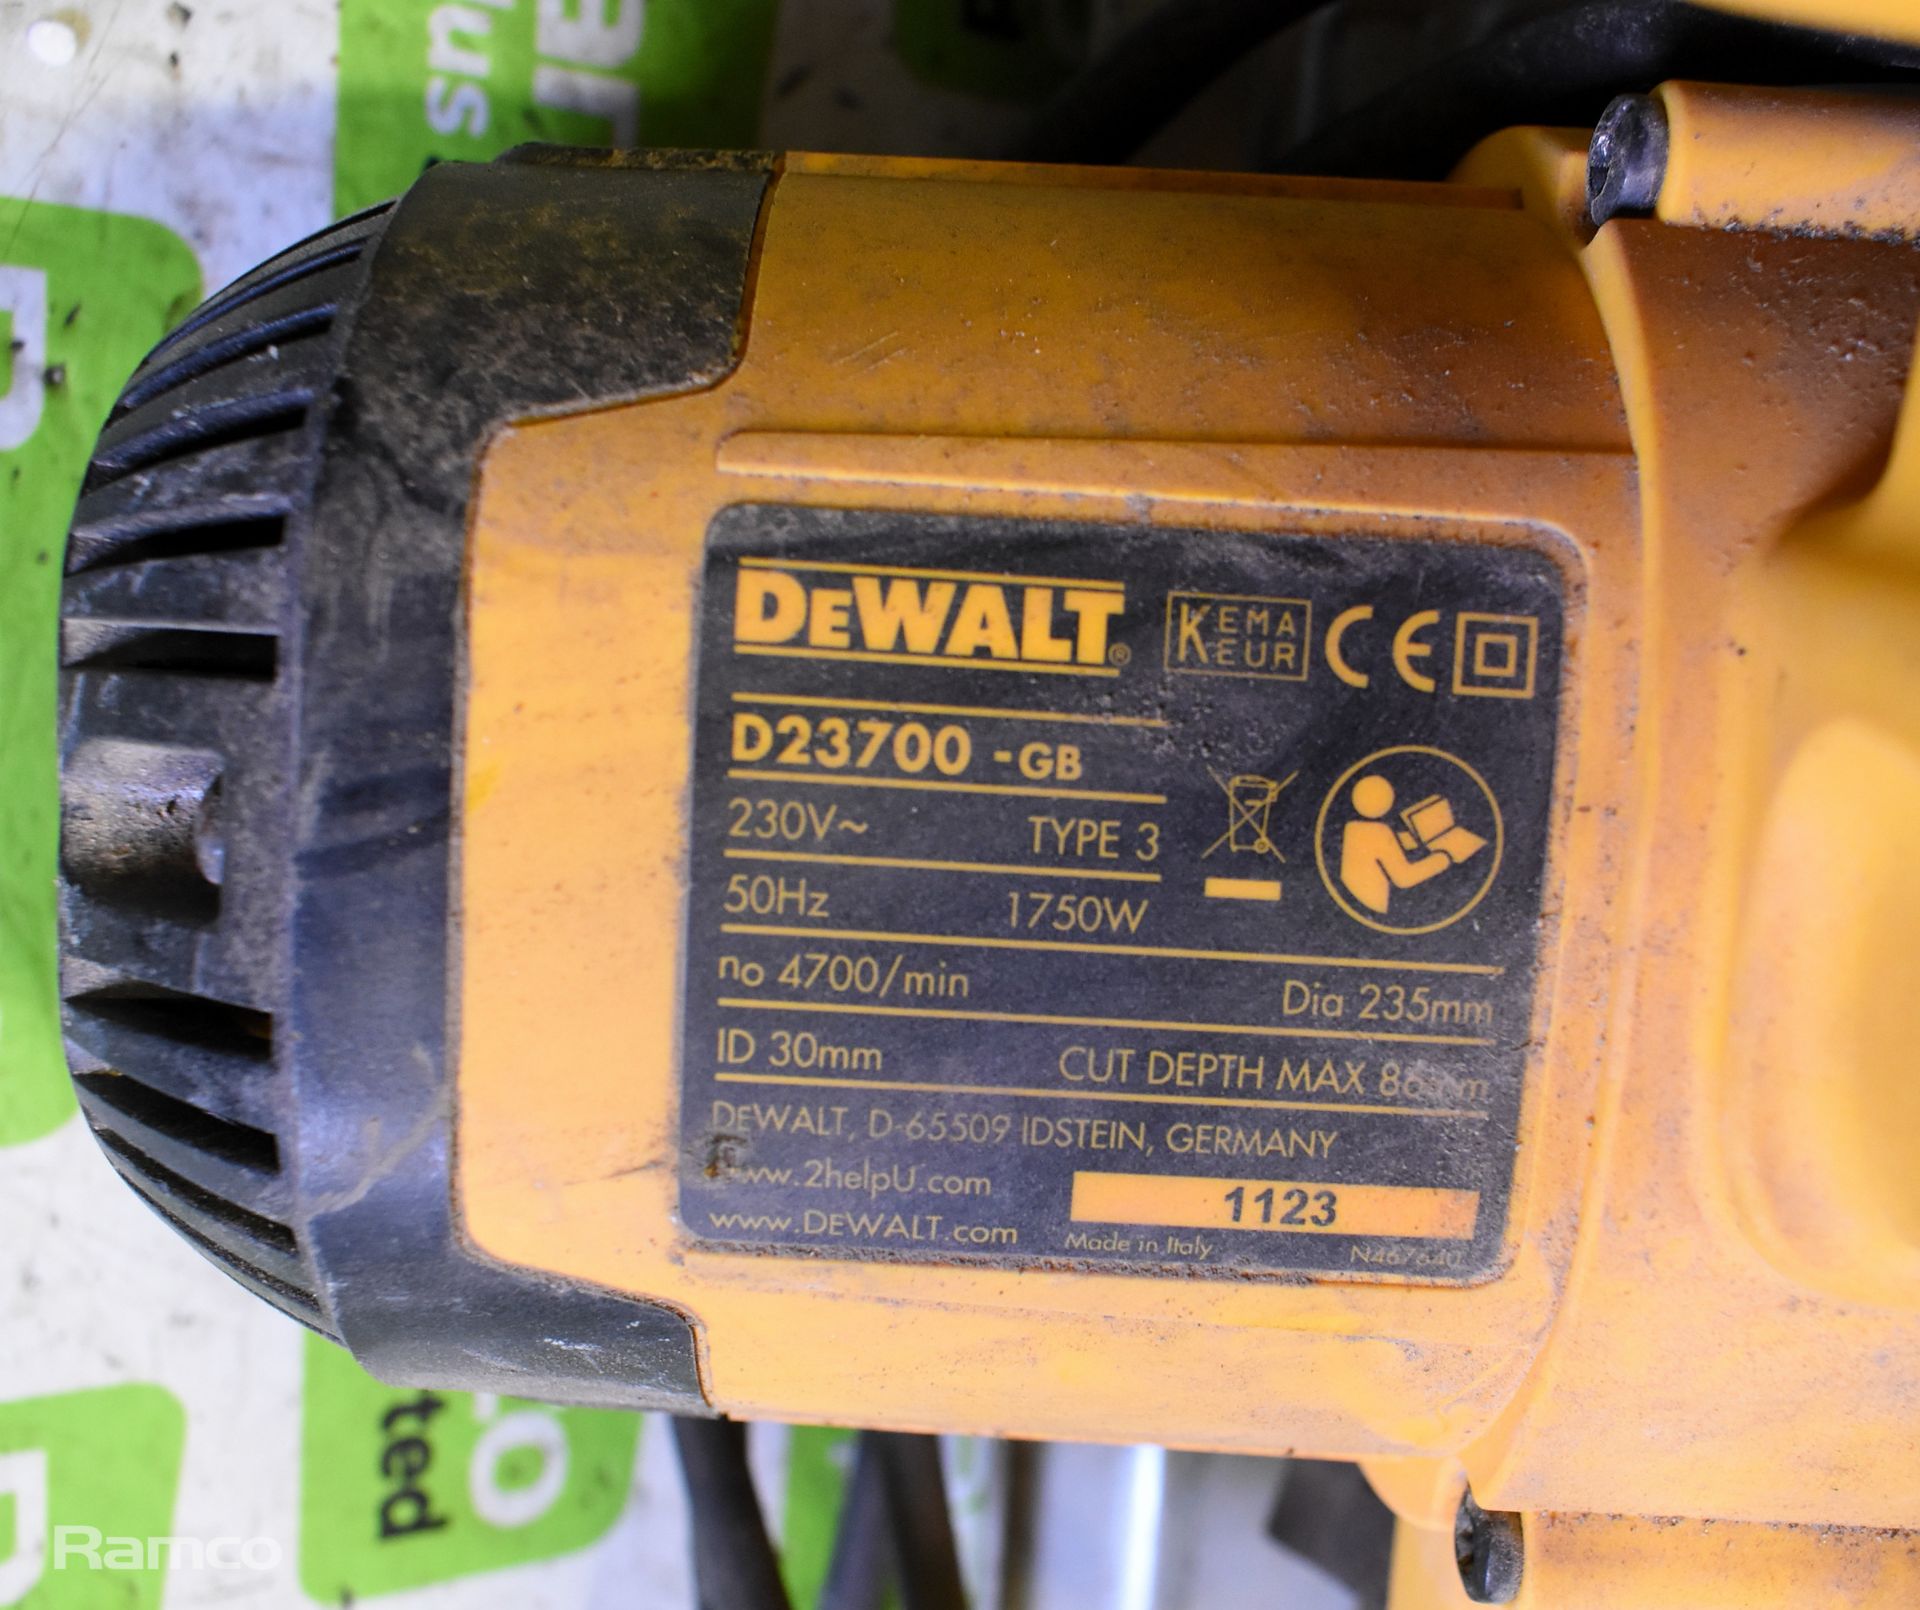 Electrical tools - Dewalt router with case, large circular saw, cordless 18V circular saw - Image 5 of 22